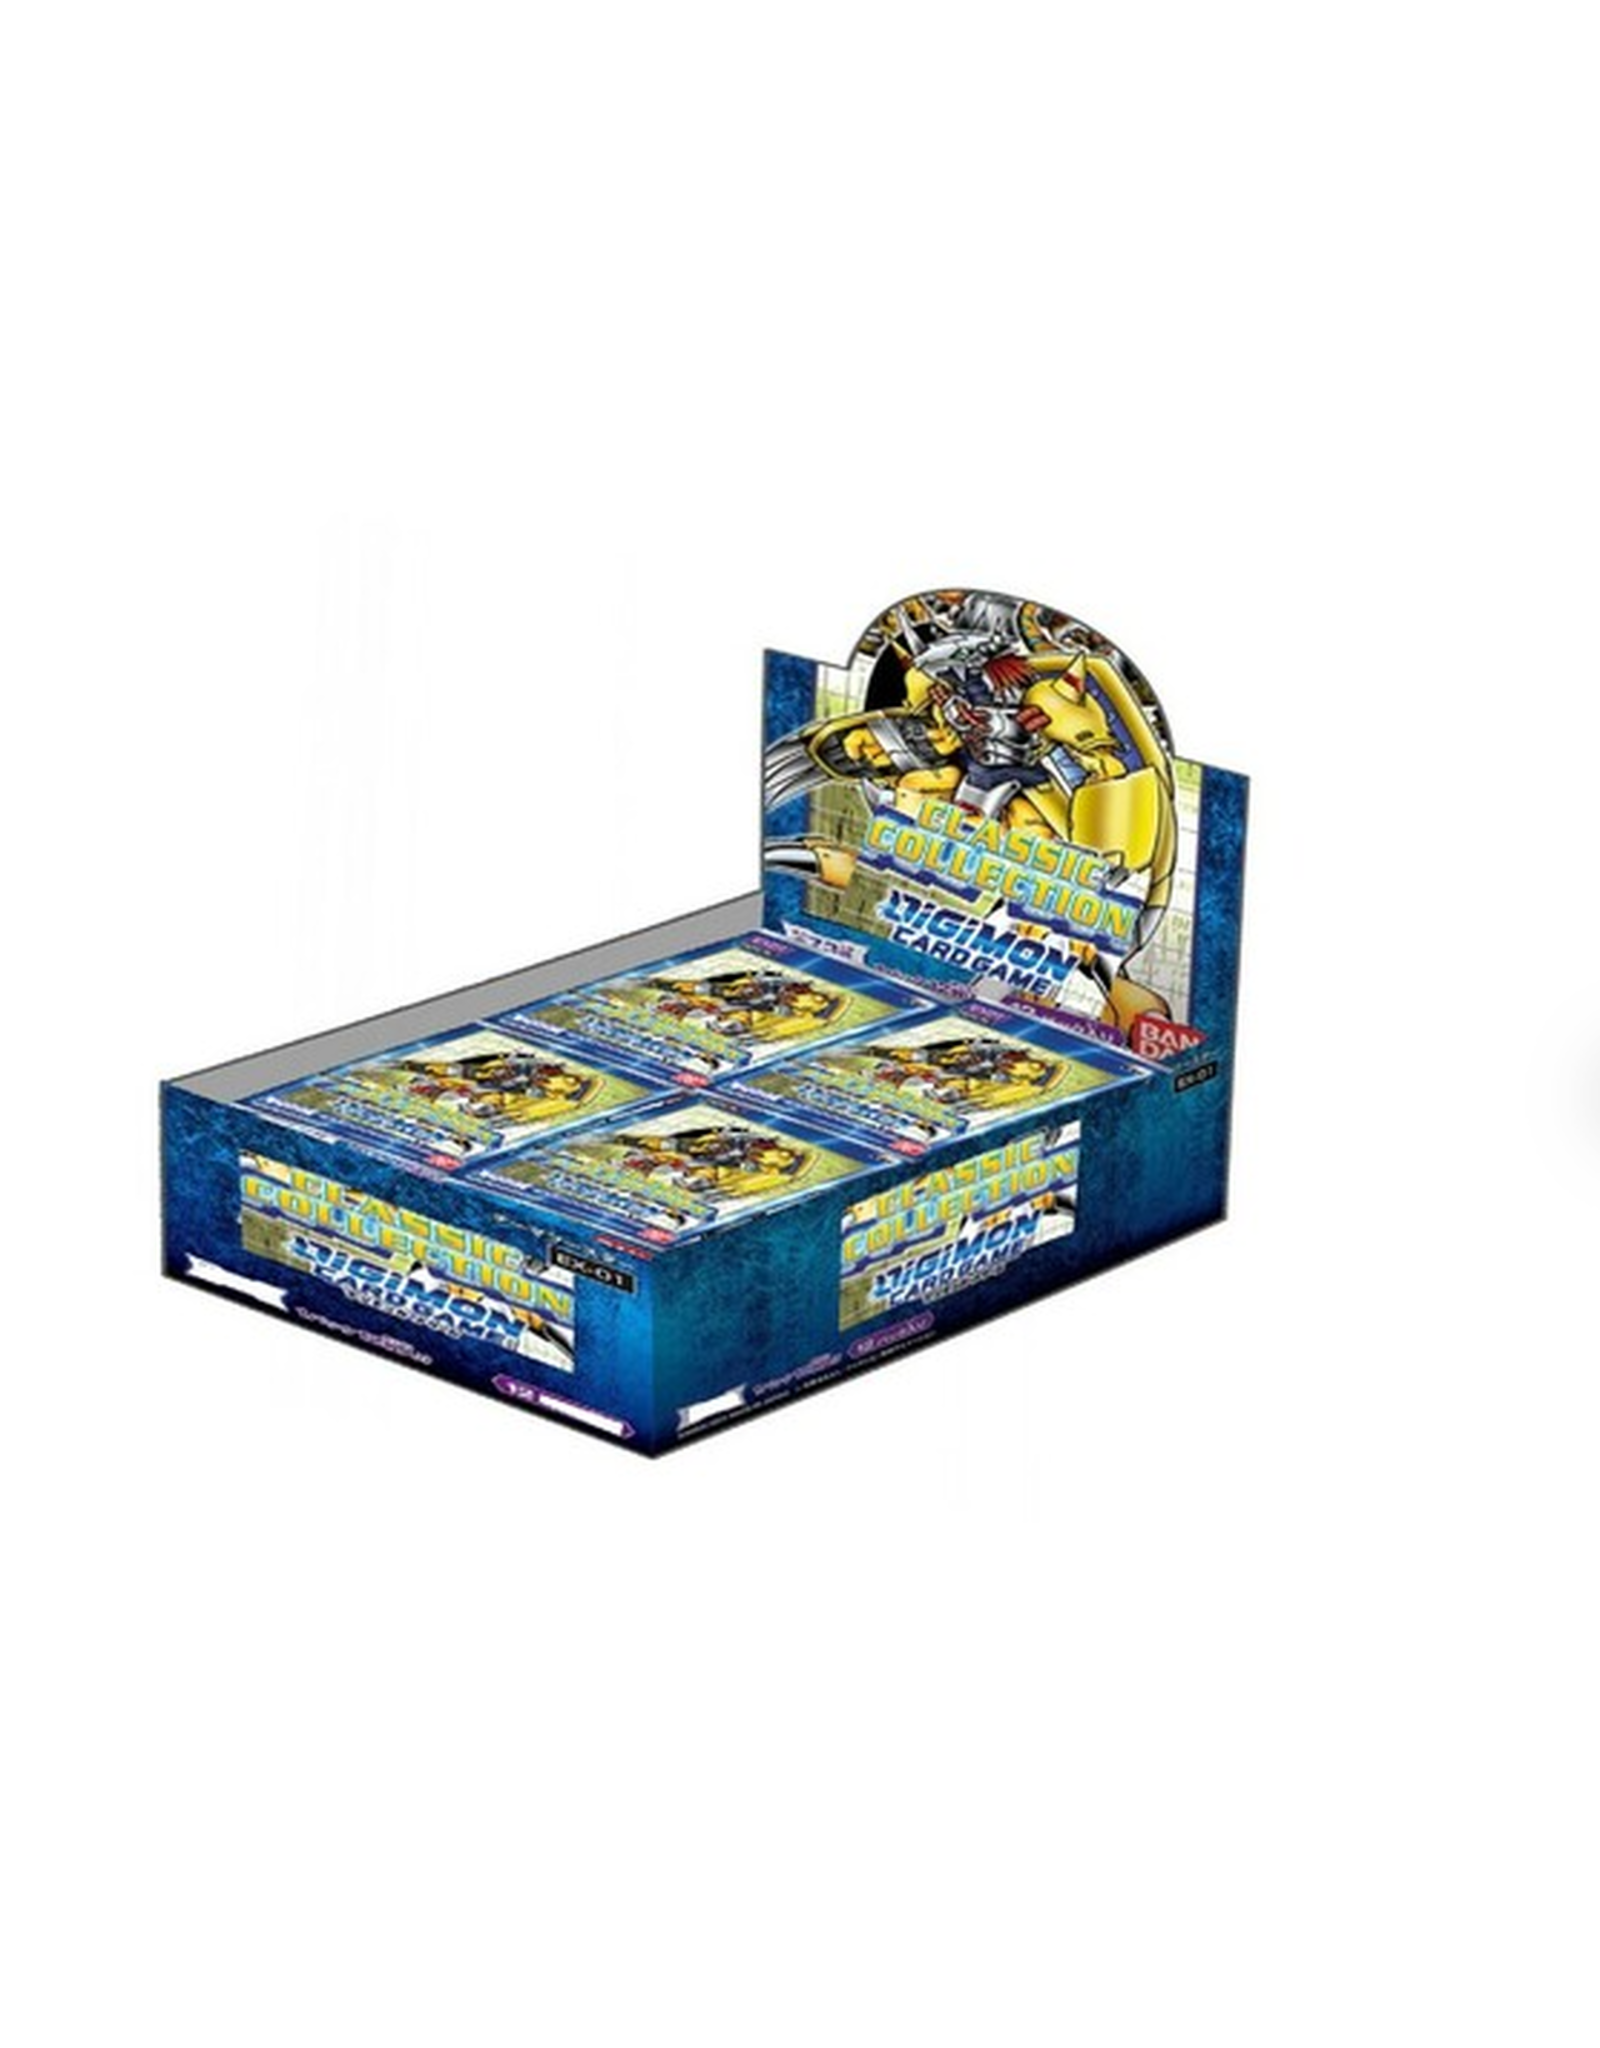 Digimon Digimon TCG - Classic Collection Booster Box